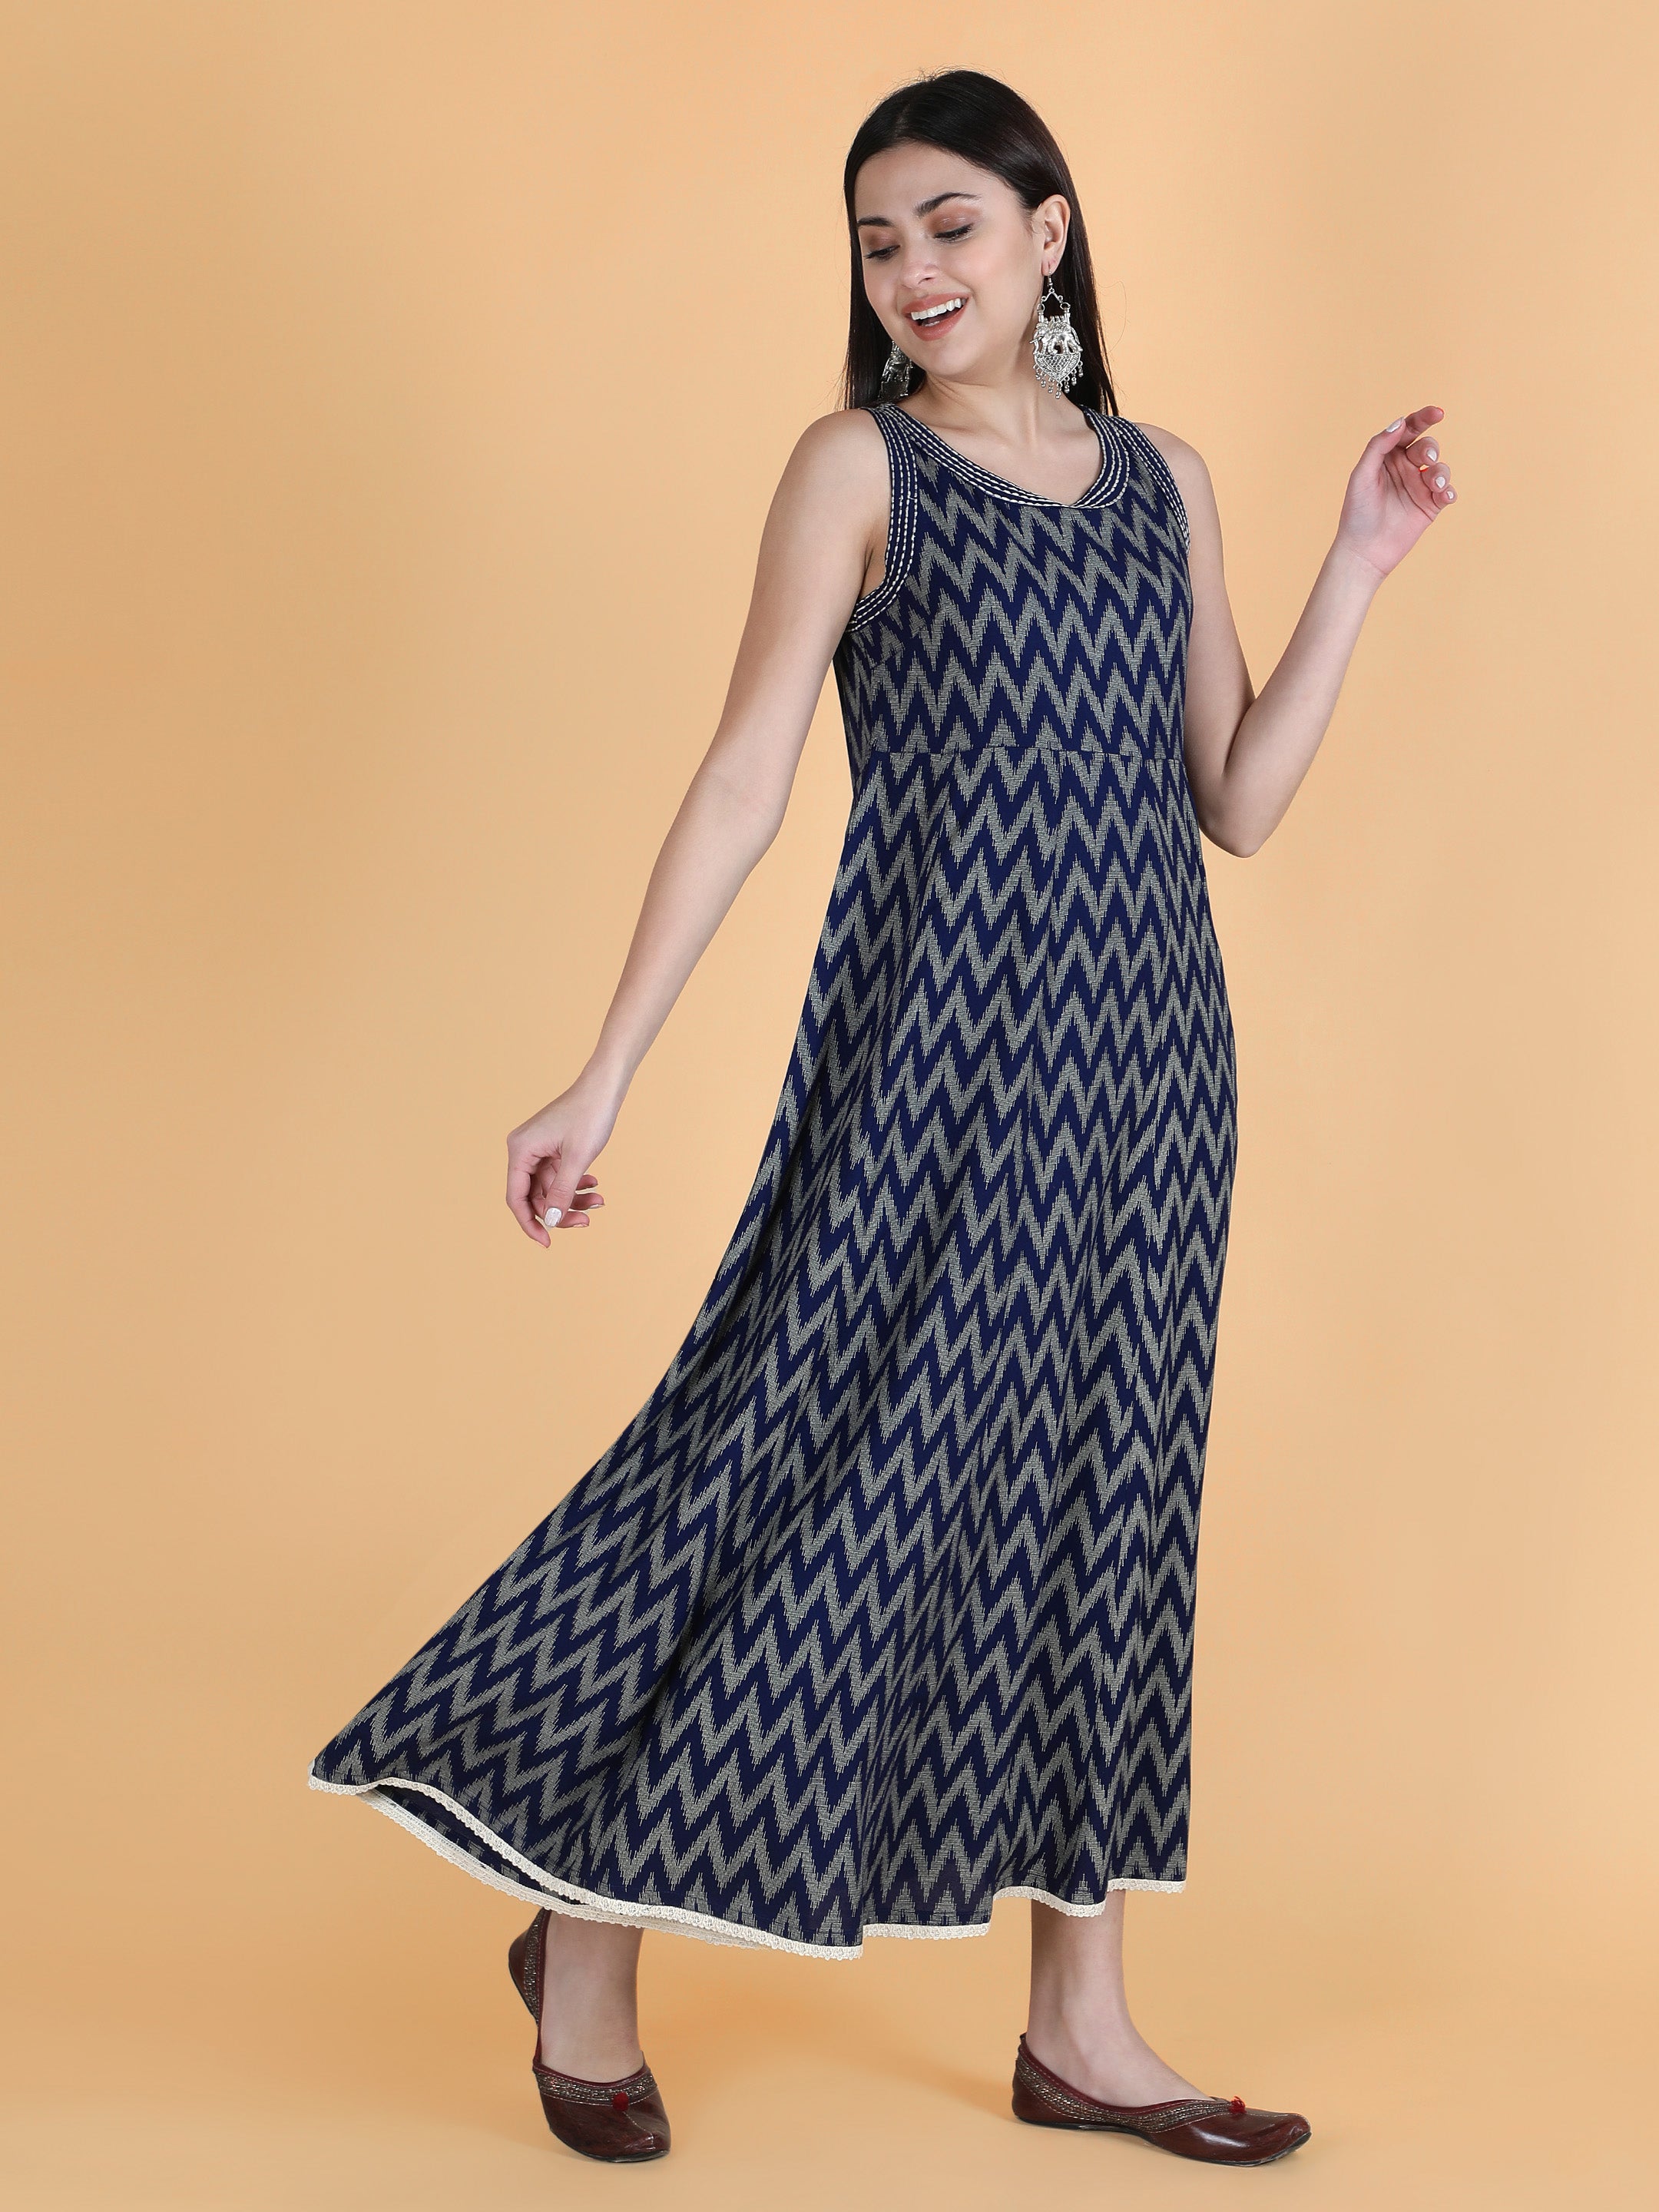 embrace-your-look-with-our-embroidered-neck-and-sleeve-finished-dress-this-dress-is-crafted-by-using-rayon-apparel-which-is-made-for-utmost-comfort-and-this-is-perfect-to-pick-for-party-wear-office-wear-weekend-get-together-and-kitty-parties